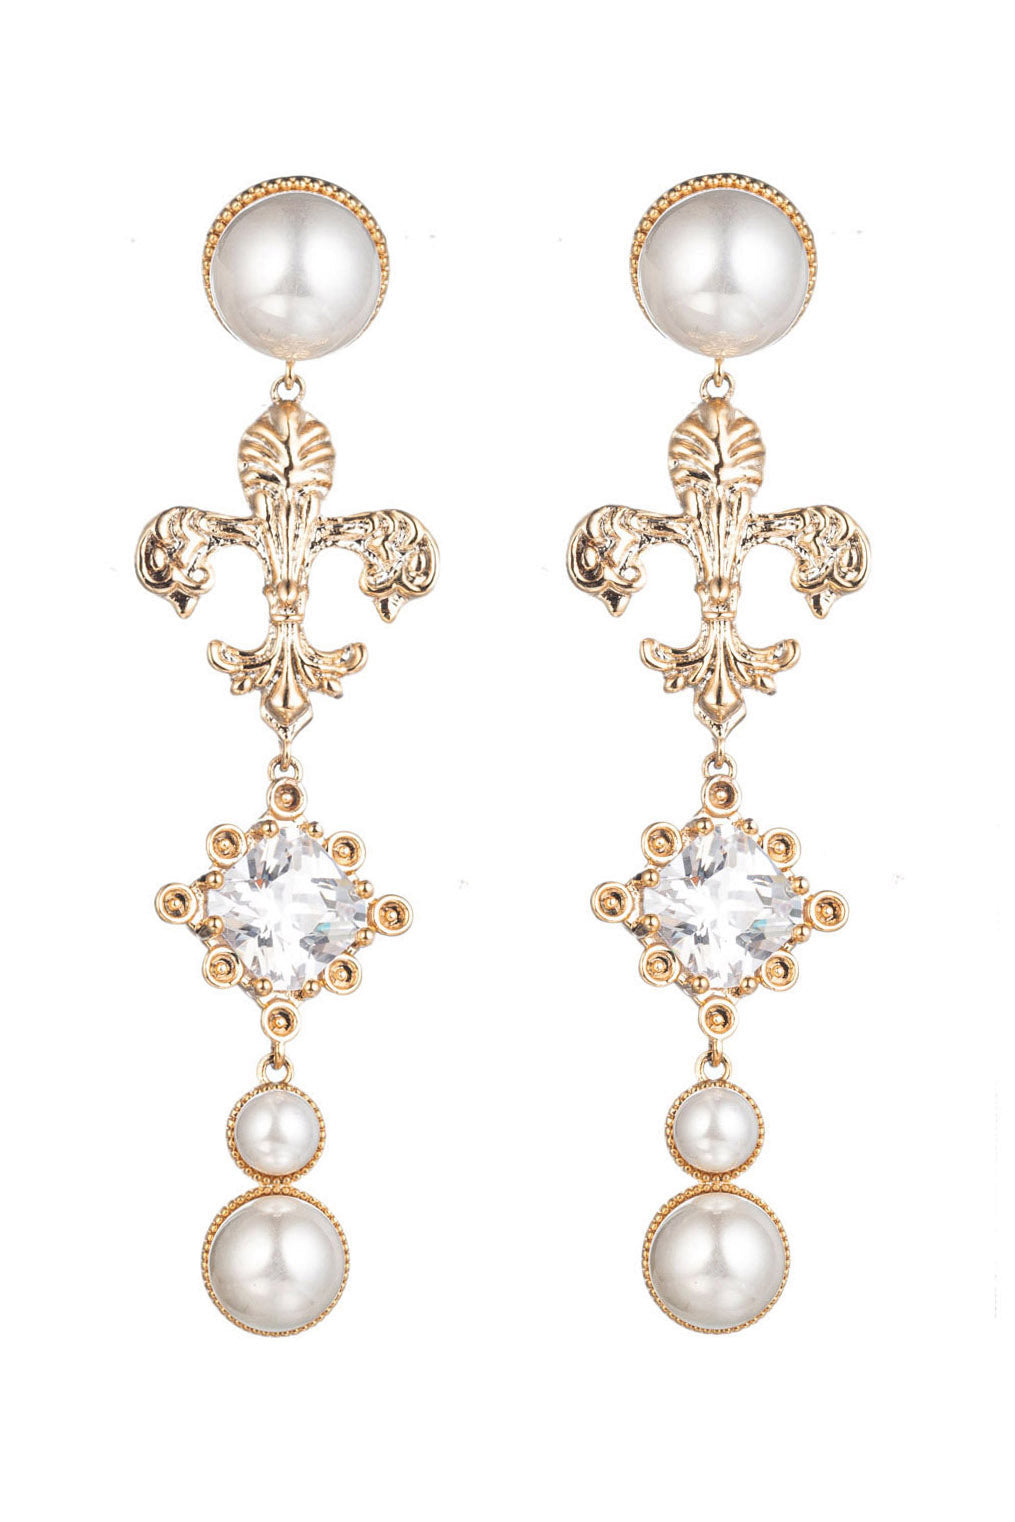 Gold tone brass drop earrings studded with shell pearls and CZ crystals.